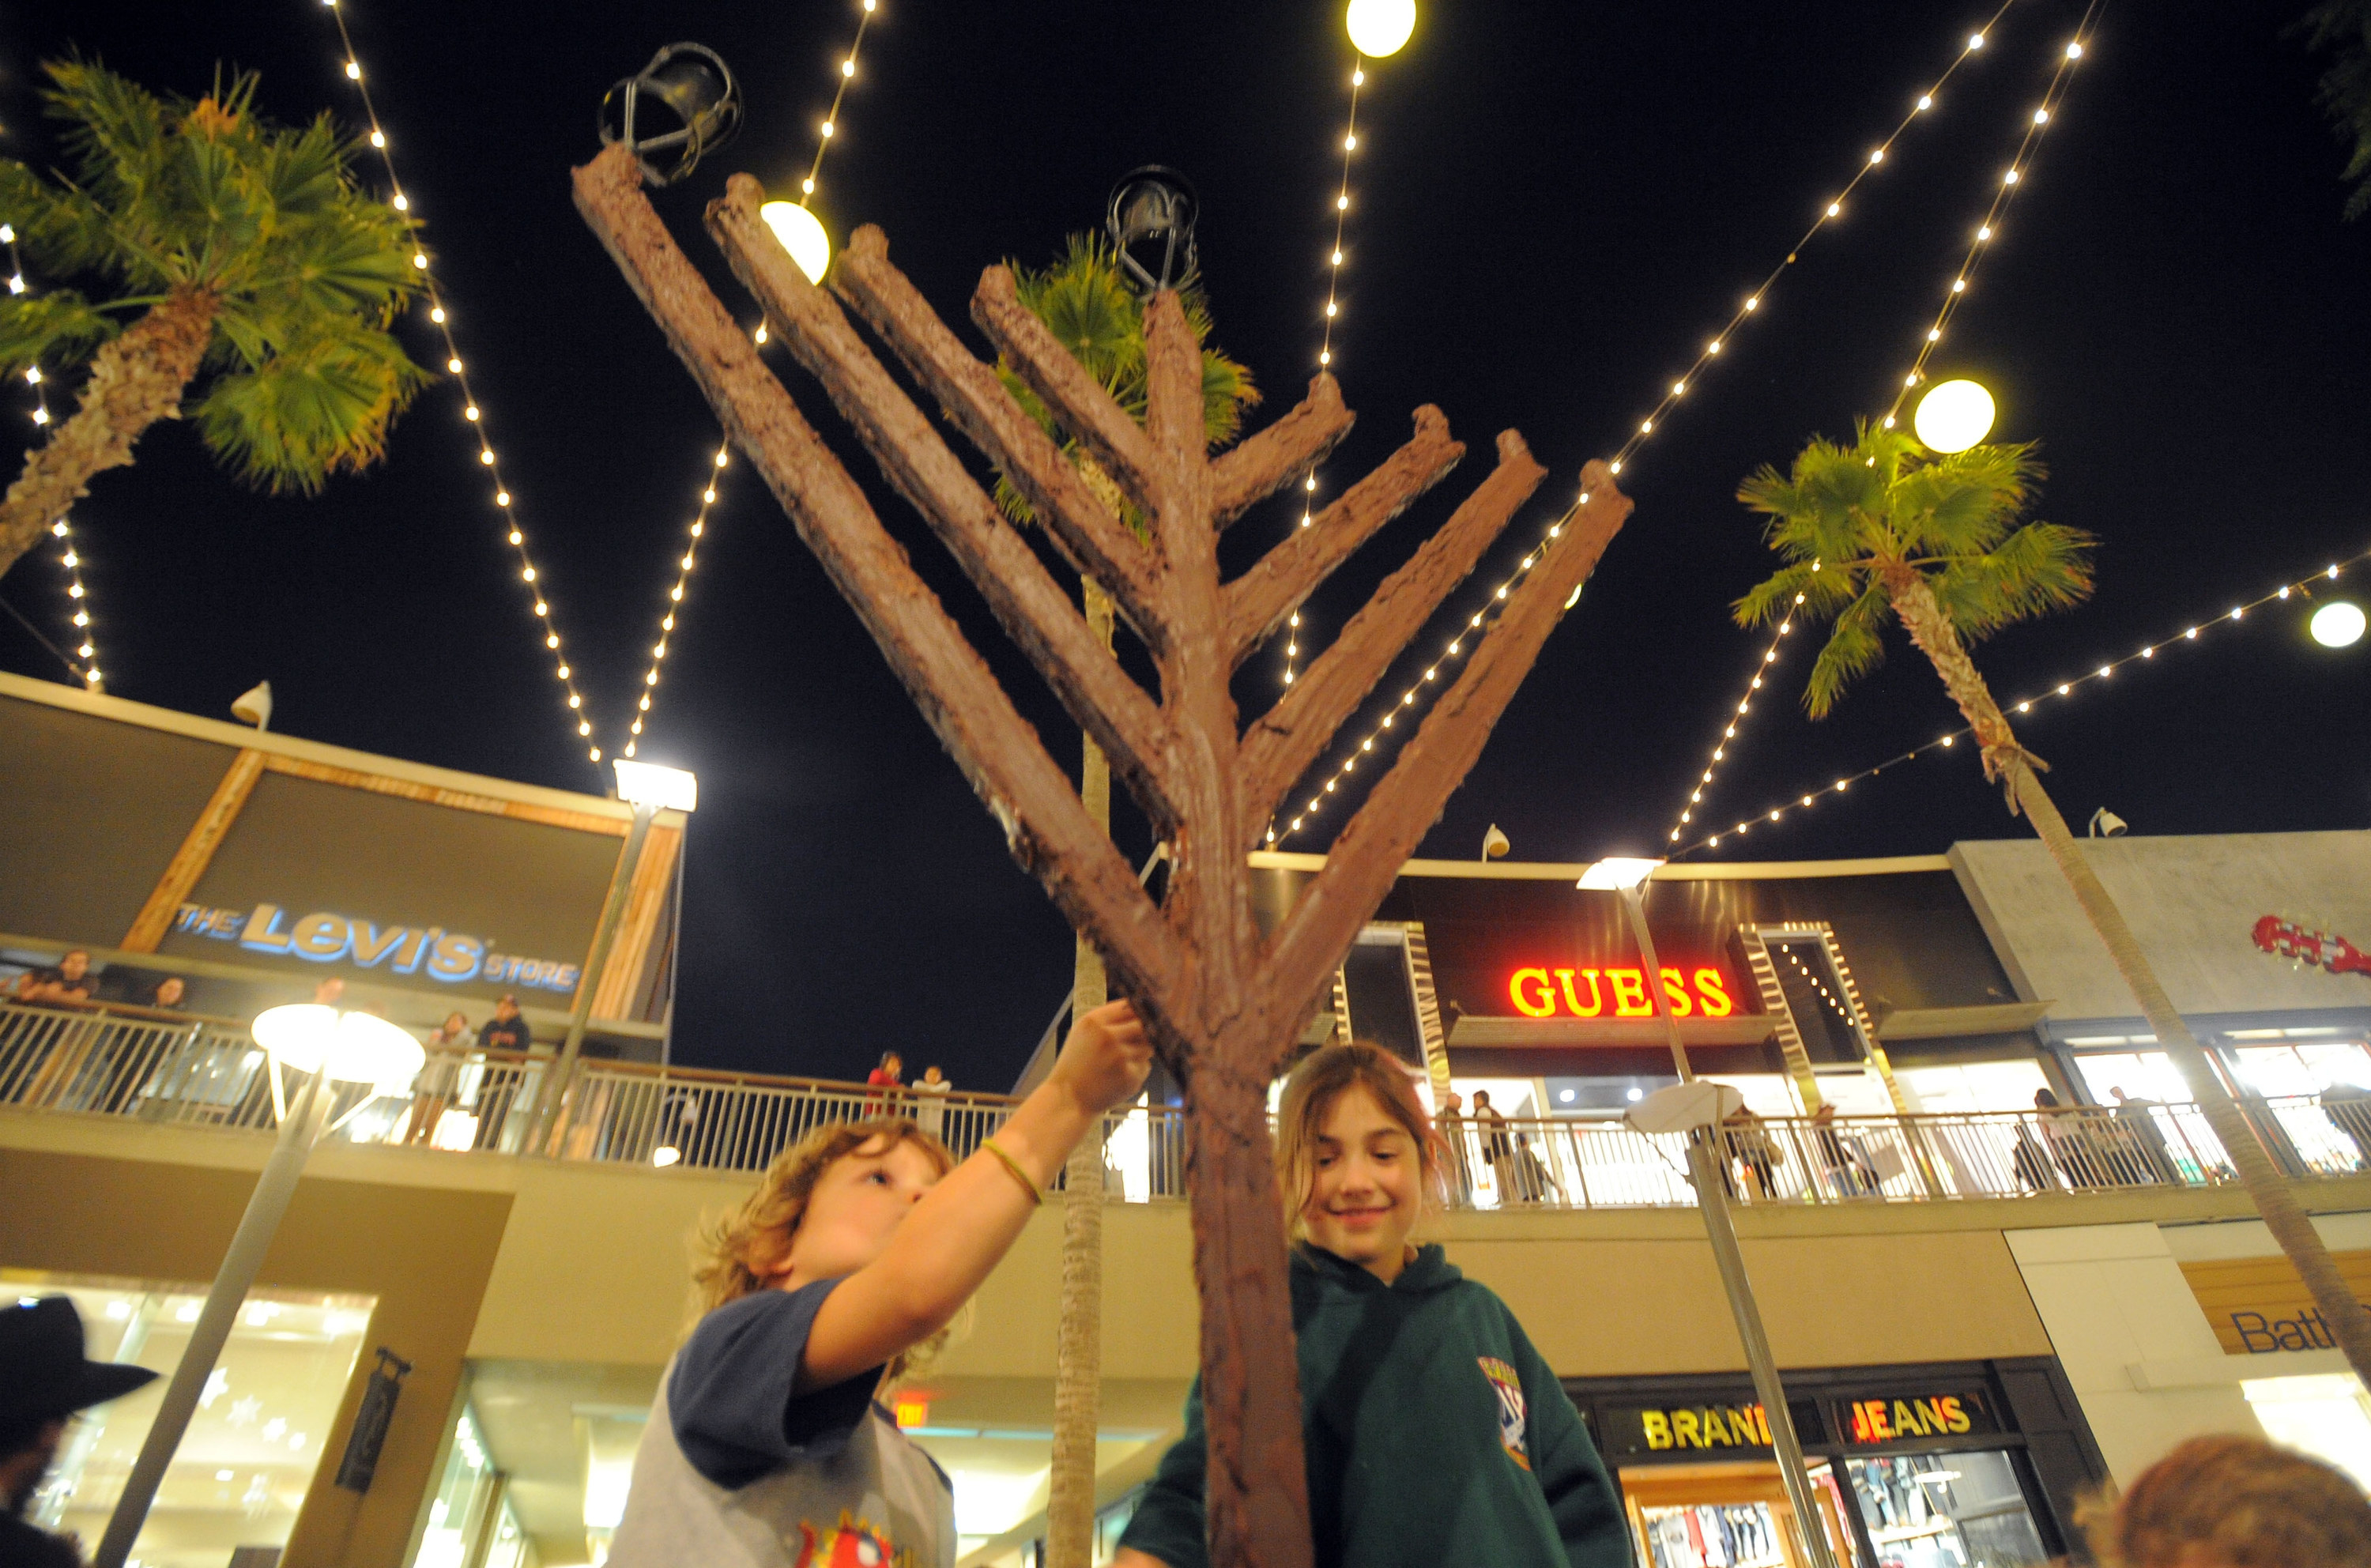 A menorah made of chocolate with two children below it, stores in the background